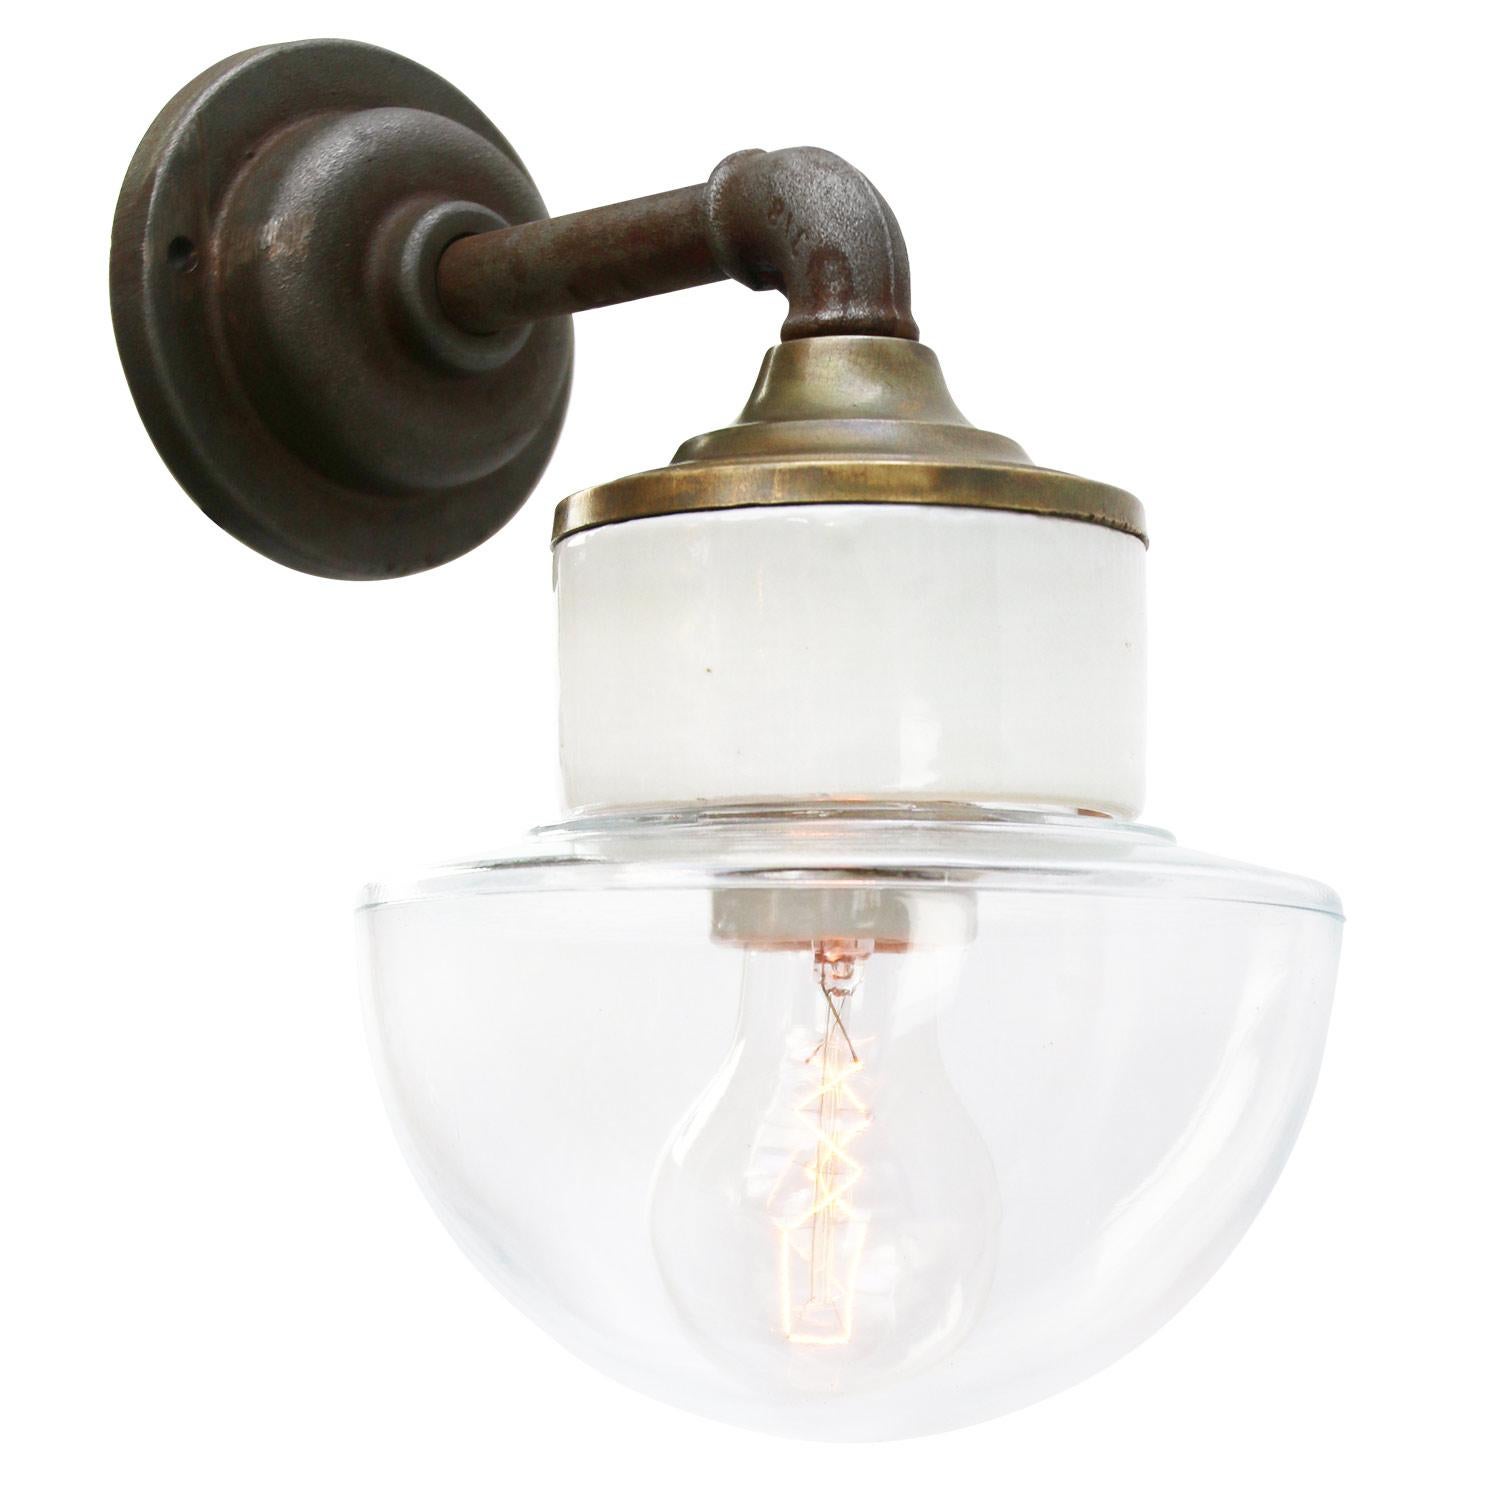 Porcelain Industrial wall lamp.
White porcelain, brass and cast iron
Clear glass.
2 conductors, no ground.

Diameter wall mount 10.5 cm / 4”.
2 holes to secure.

For use inside only

Weight: 2.05 kg / 4.5 lb

Priced per individual item. All lamps